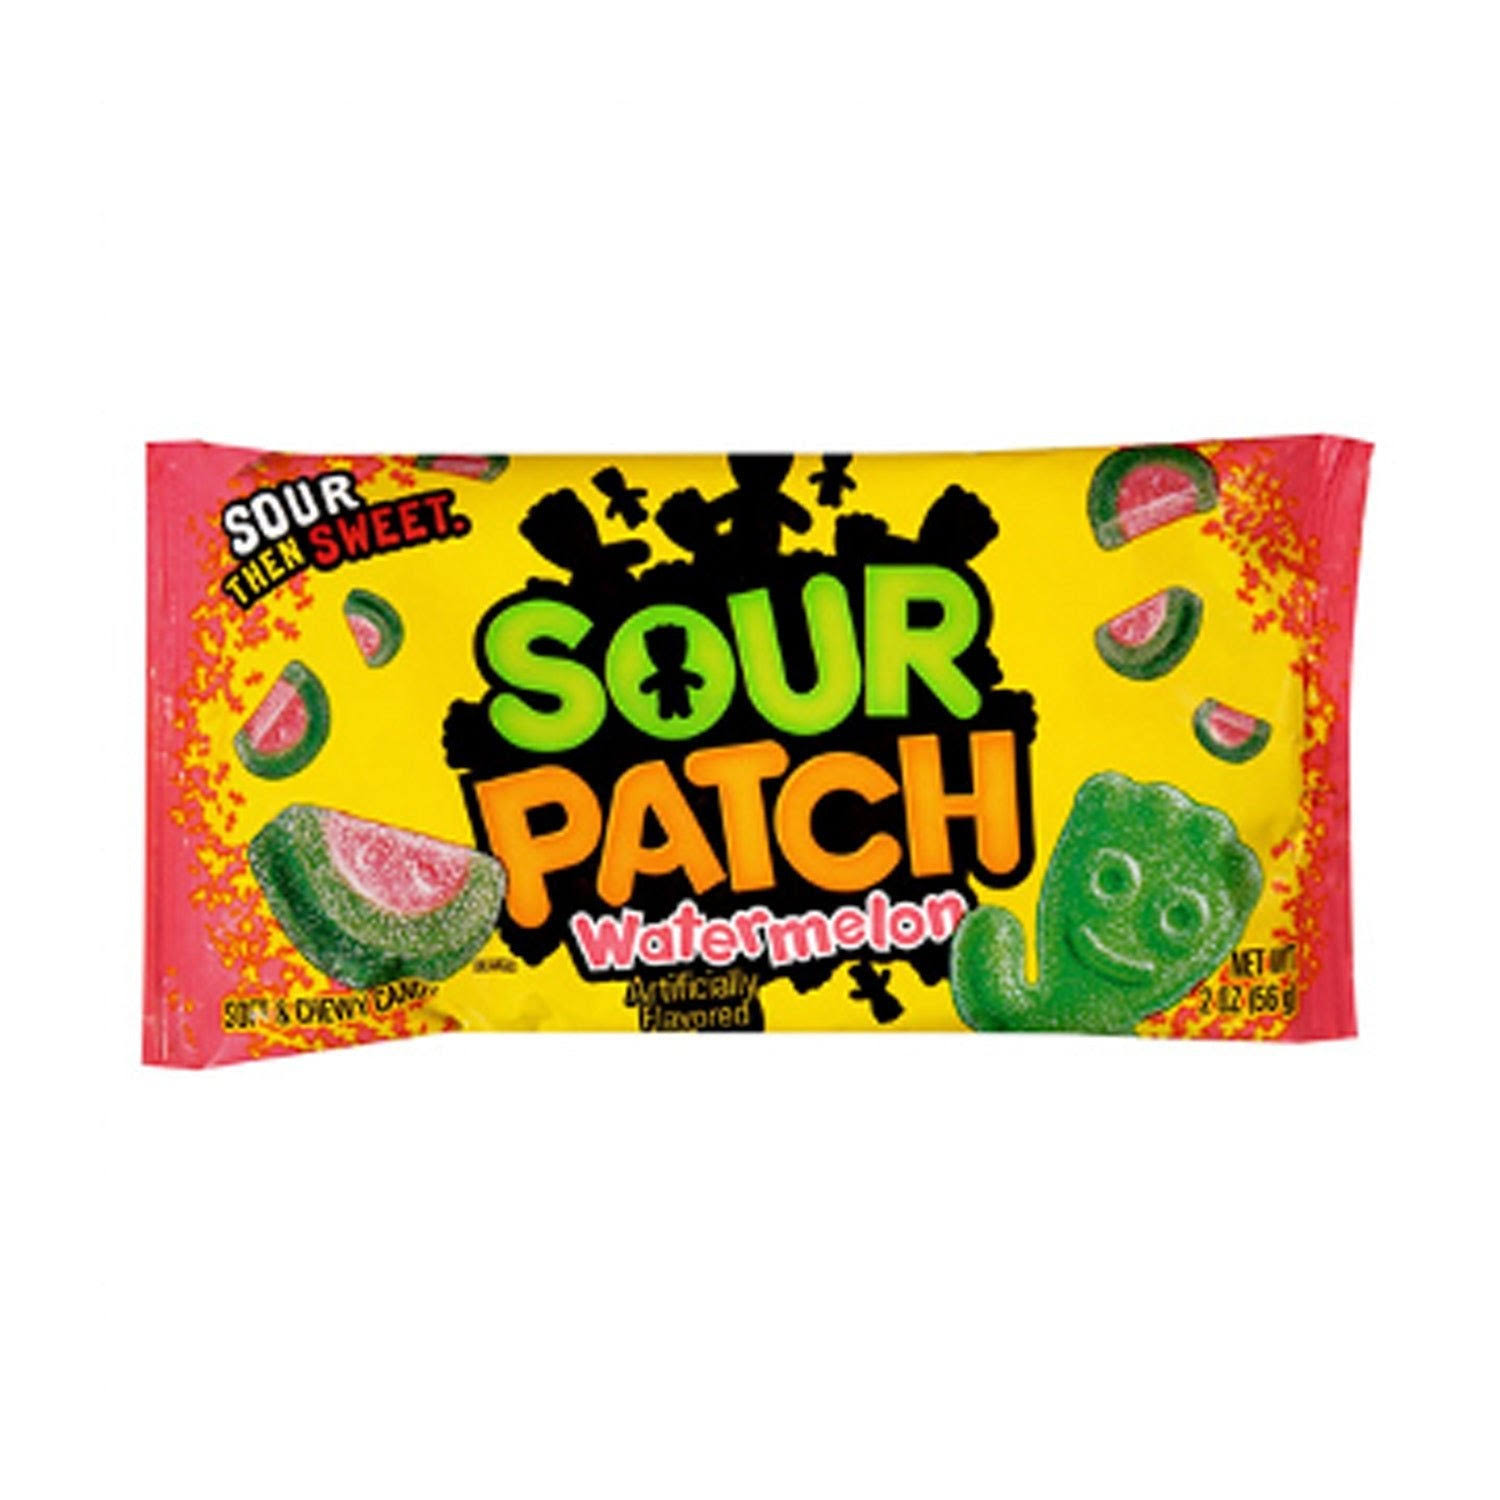 Sour then Sweet Sour Patch Watermelon Soft and Chewy Candy - 56g